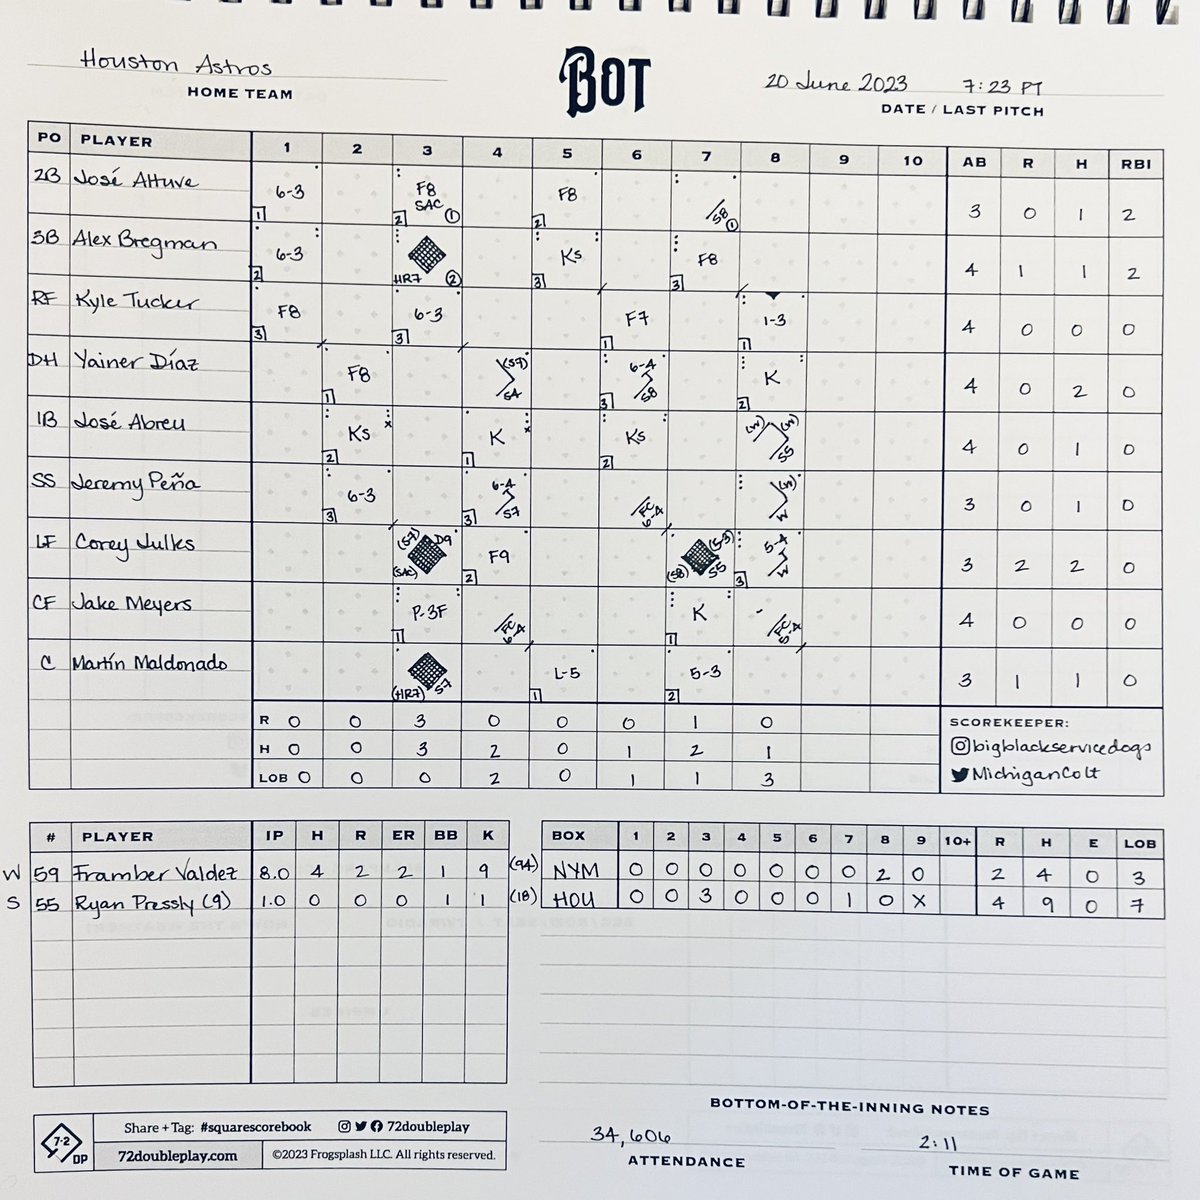 A game that HAD to be scored! Loved it 💙🧡 @AstrosRadioMLB @astros #Ready2Reign #TheJoyOfKeepingScore #SquareScorebook @72doubleplay #BaseballIsLife And of course: #FisherOut #SellTheTeam #StayInOakland #OaklandForever #StadiumScam